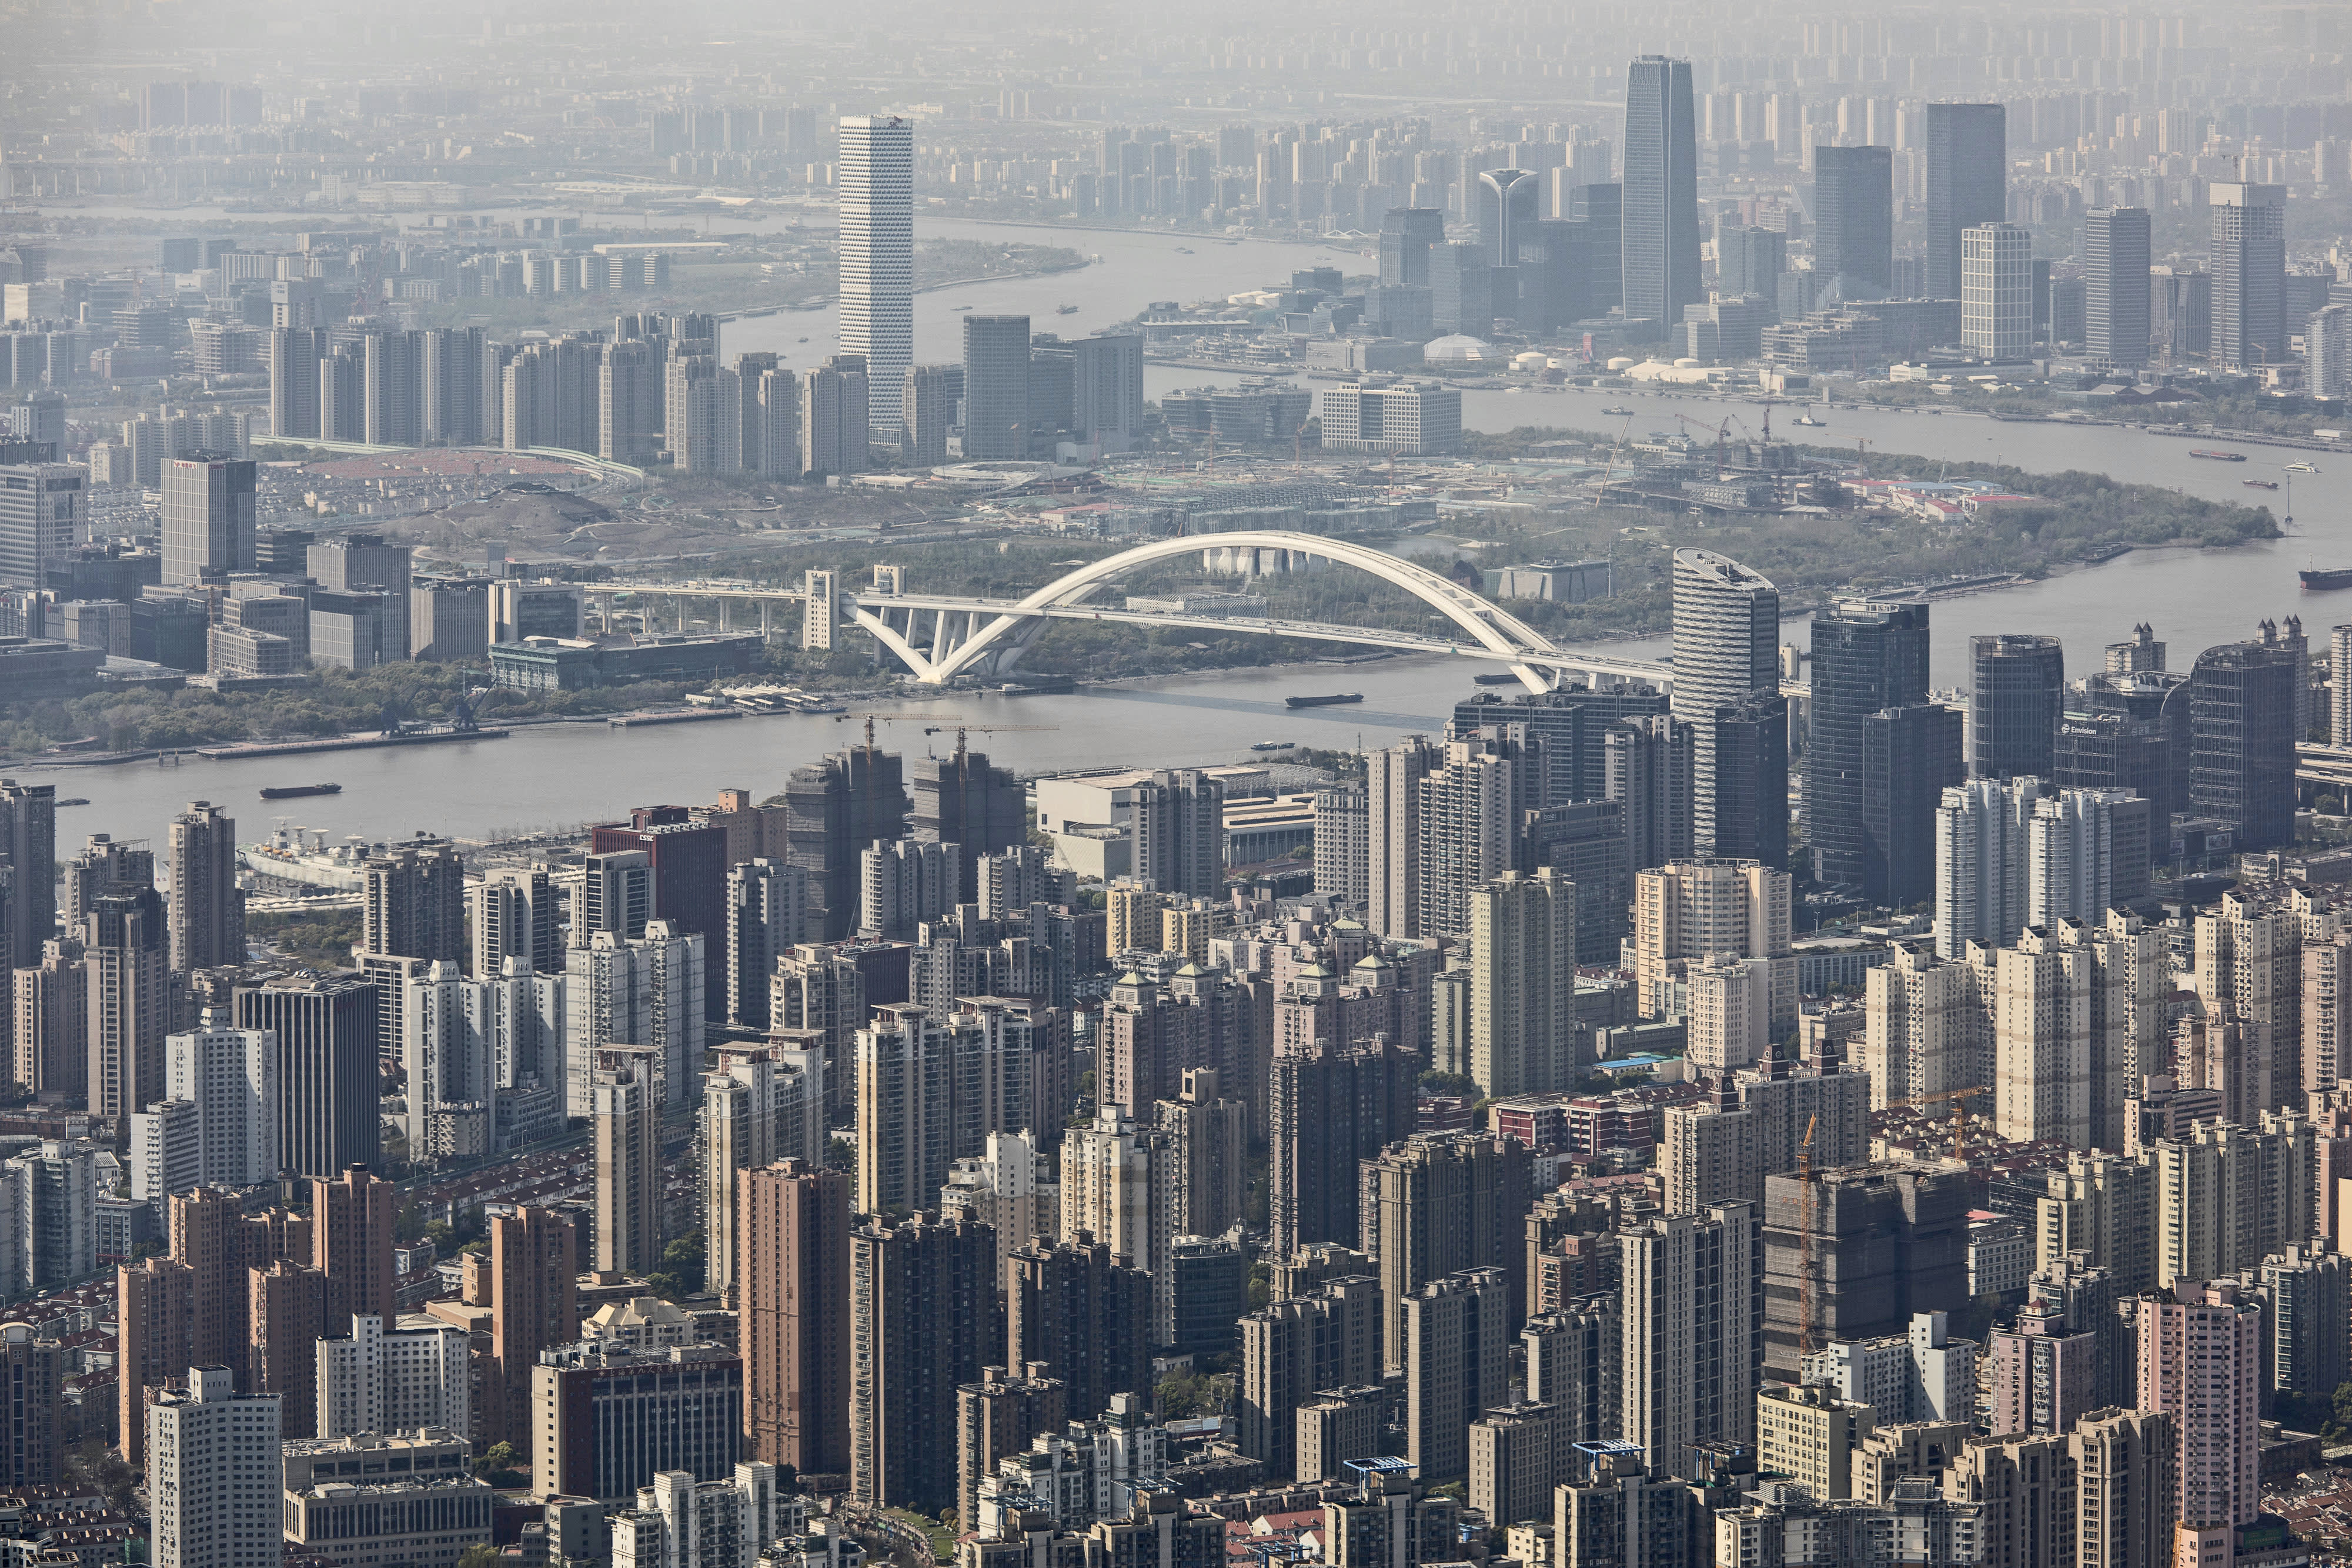 Grow Investment says it could take a decade to overhaul China’s real estate sector